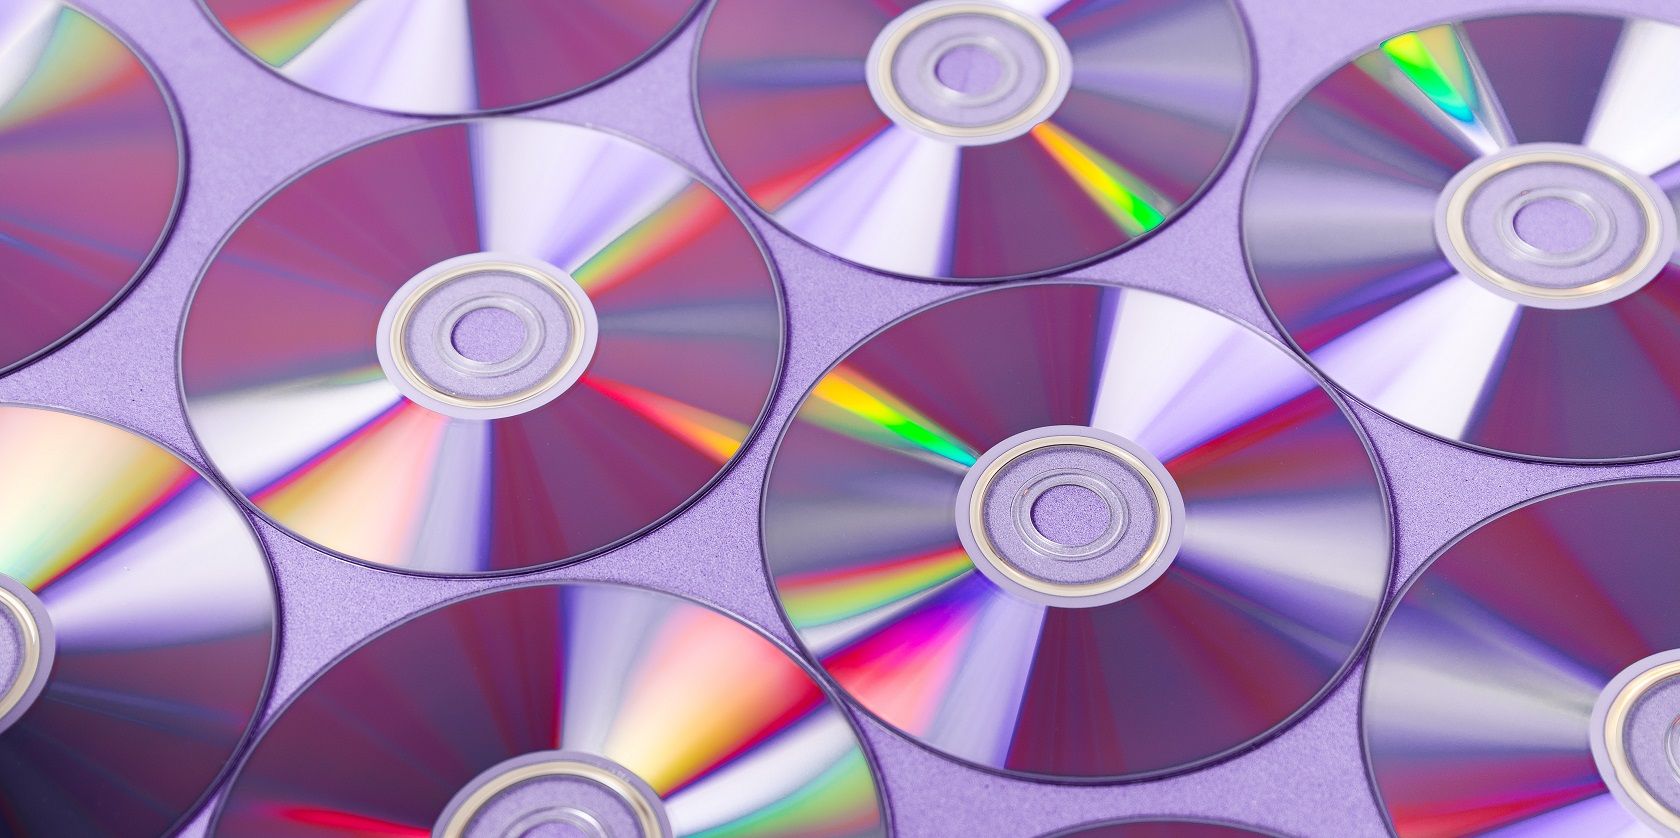 What To Do With Old CDs: The Best Recycle & Repurpose Options